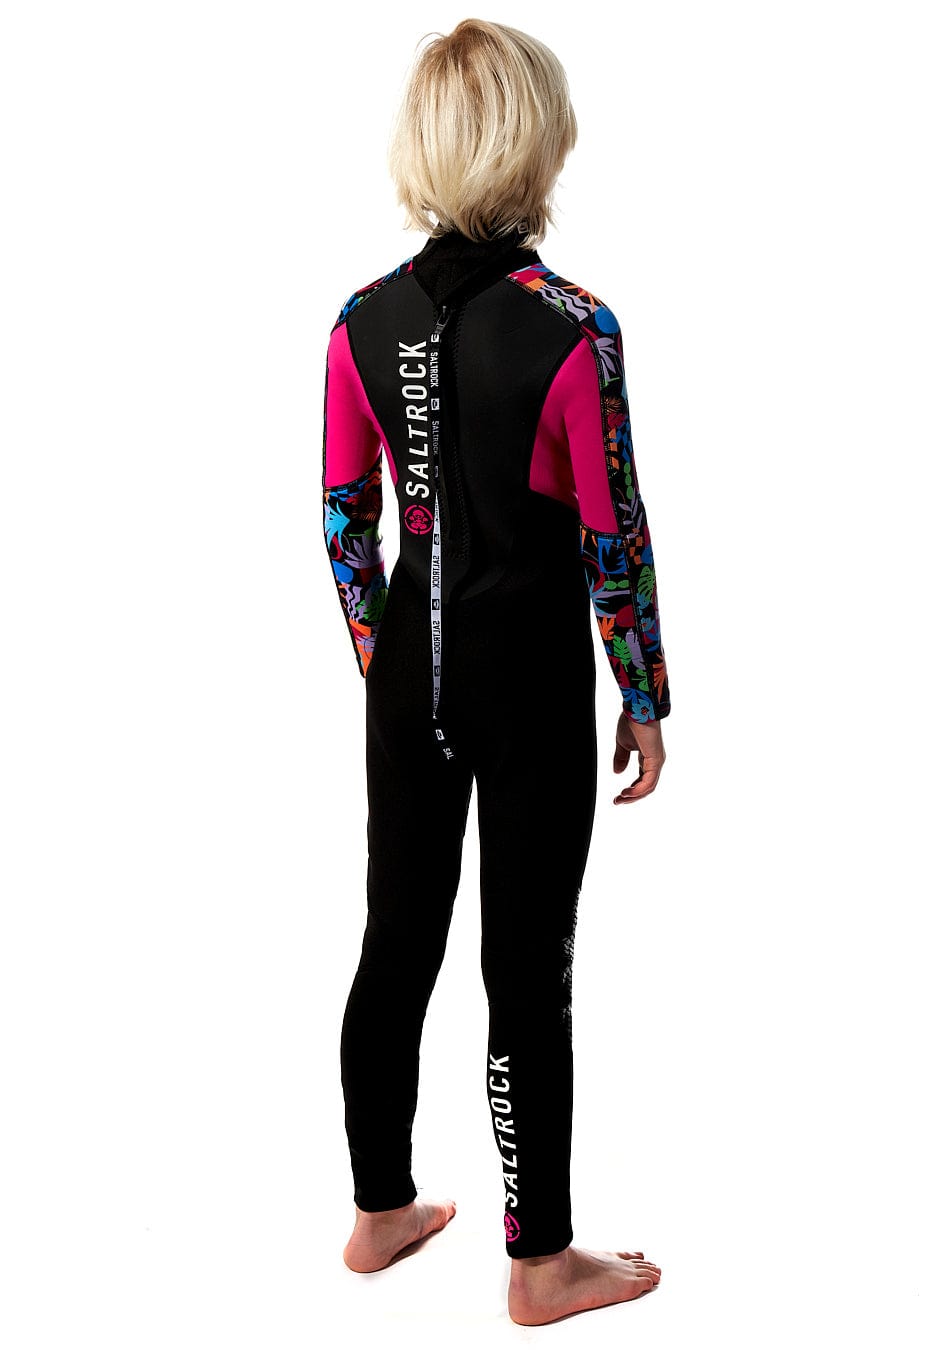 A girl wearing a Saltrock Zephyr - Kids 3/2 Full Wetsuit - Black and pink.